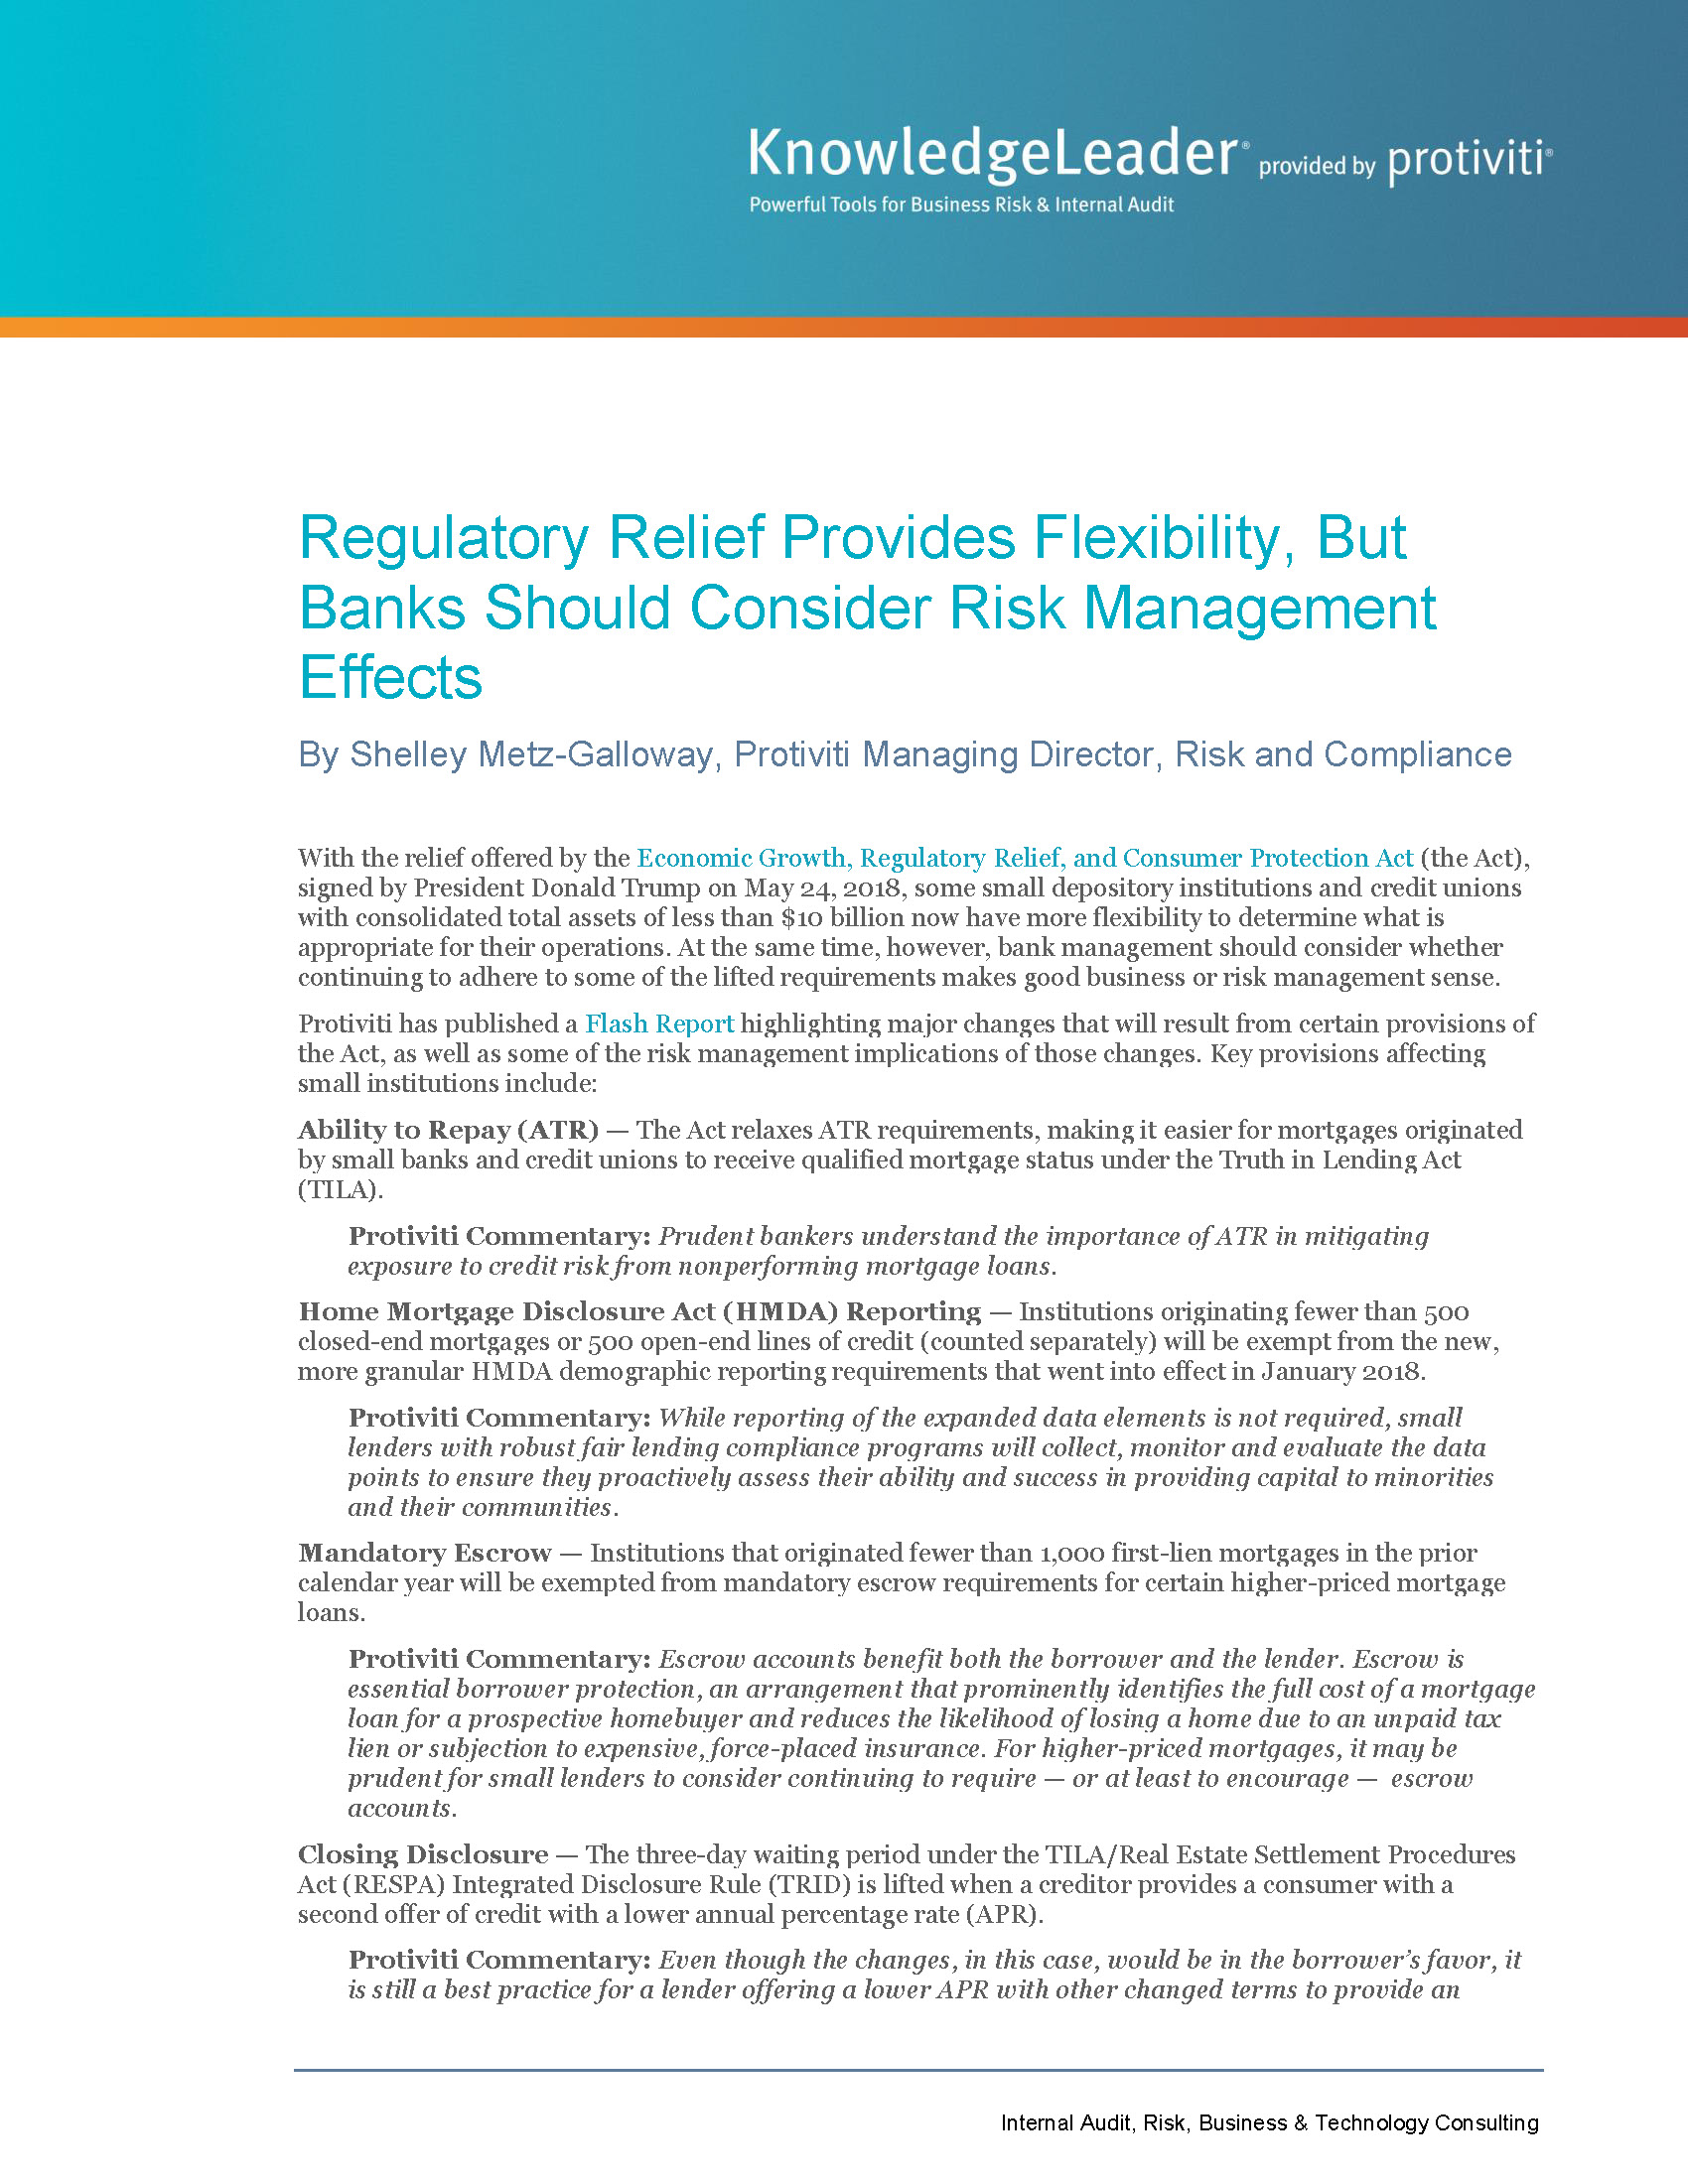 Screenshot of the first page of Regulatory Relief Provides Flexibility, But Banks Should Consider Risk Management Effects